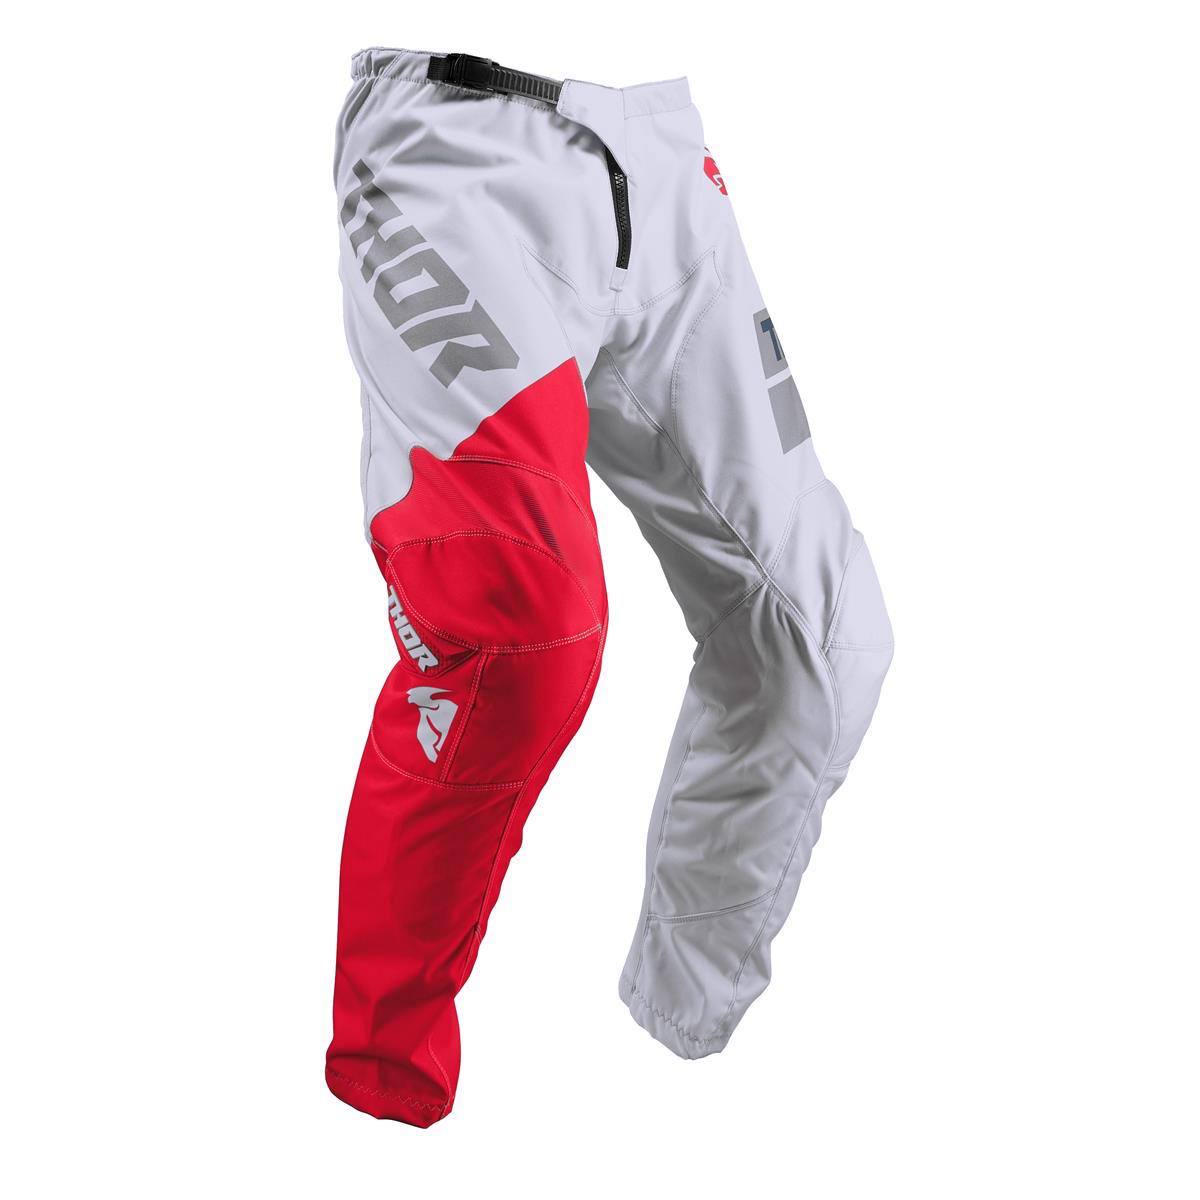 Thor MX Pants Sector Shear - Light Grey/Red